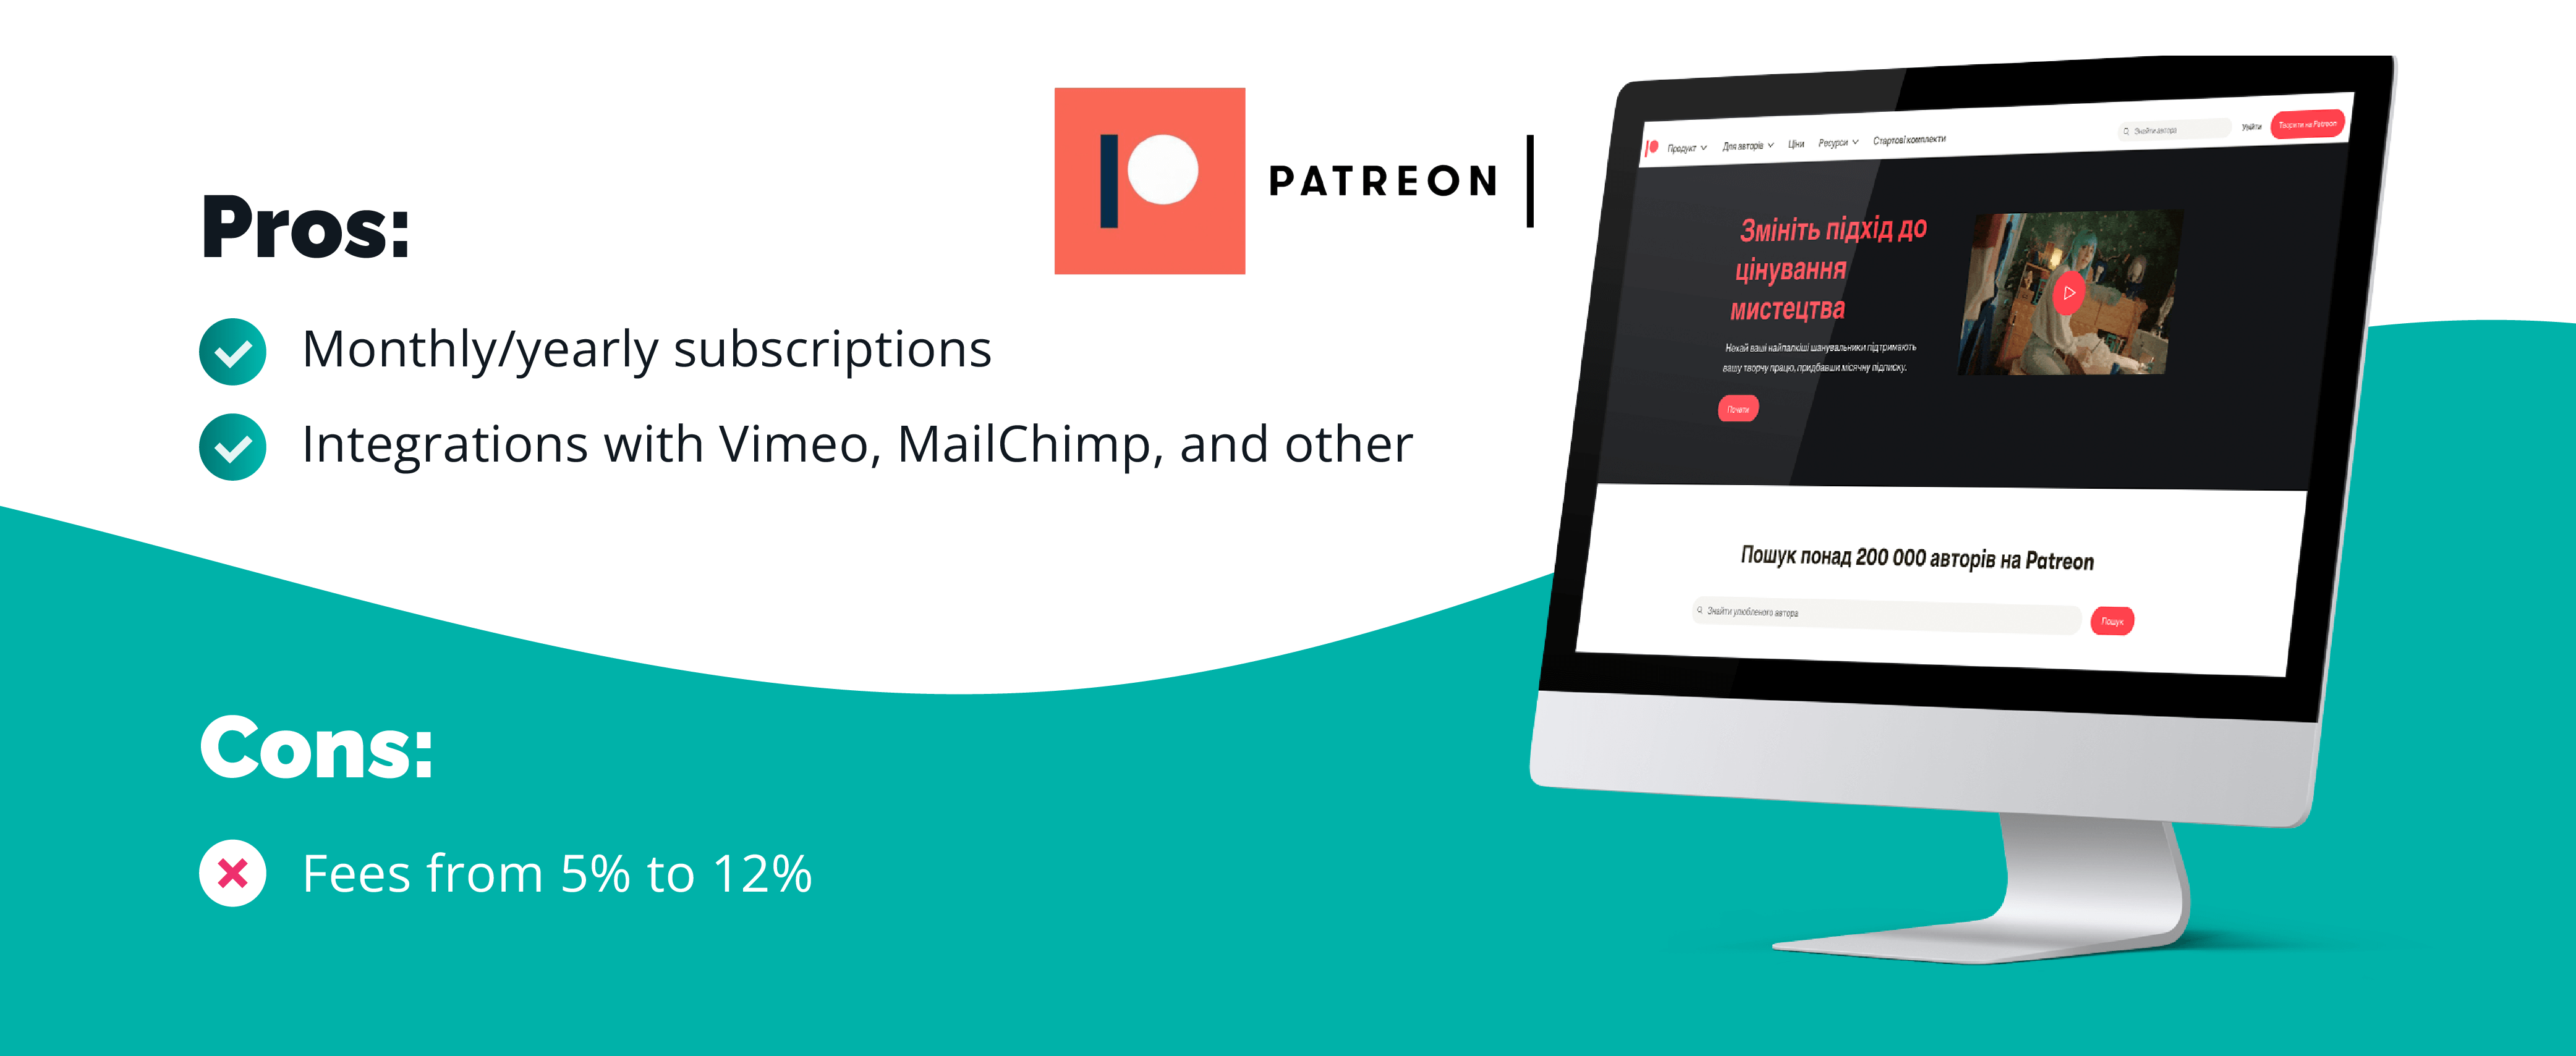 Pros & Cons of Patreon